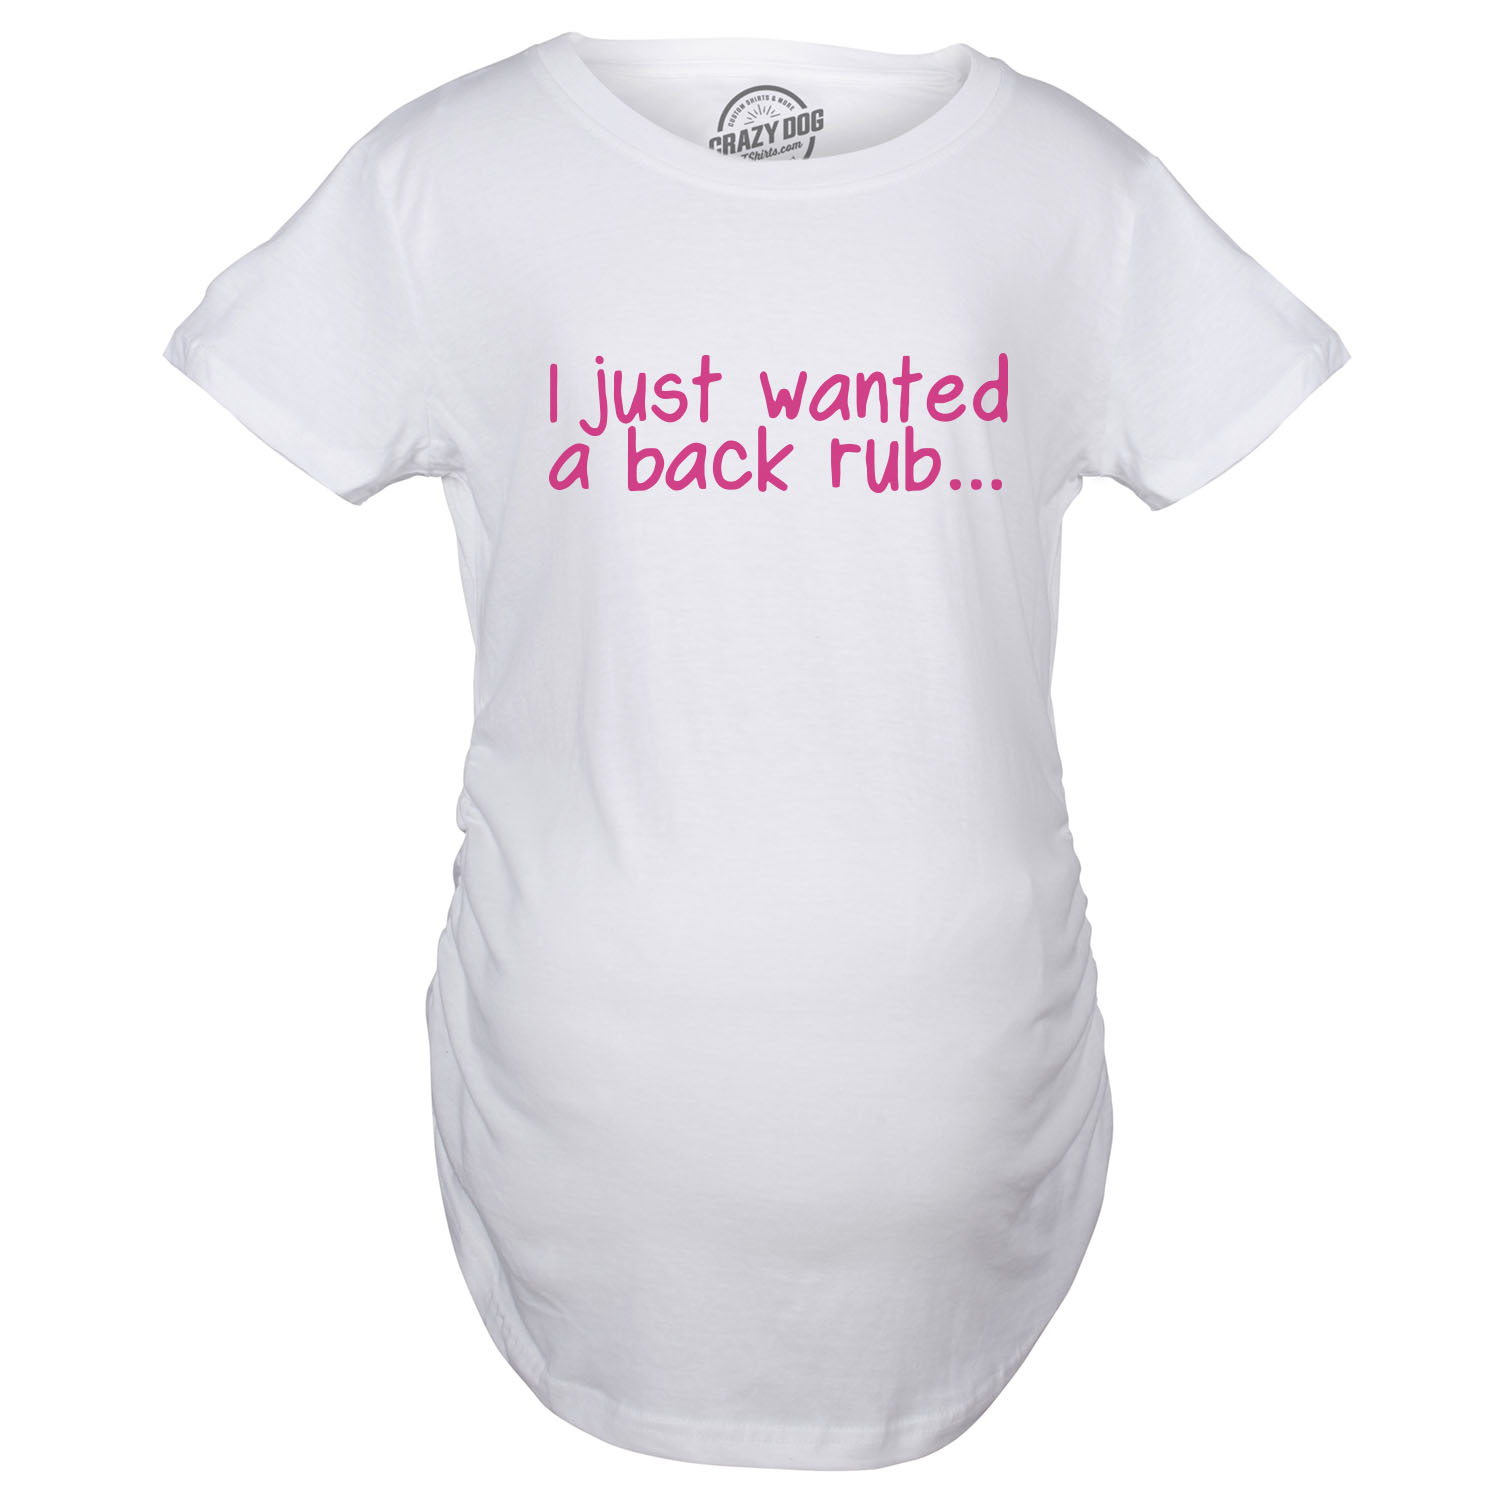 Crazy Dog Tshirts Maternity I Just Wanted A Back Rub Funny T shirts Pregnancy Tees for Women